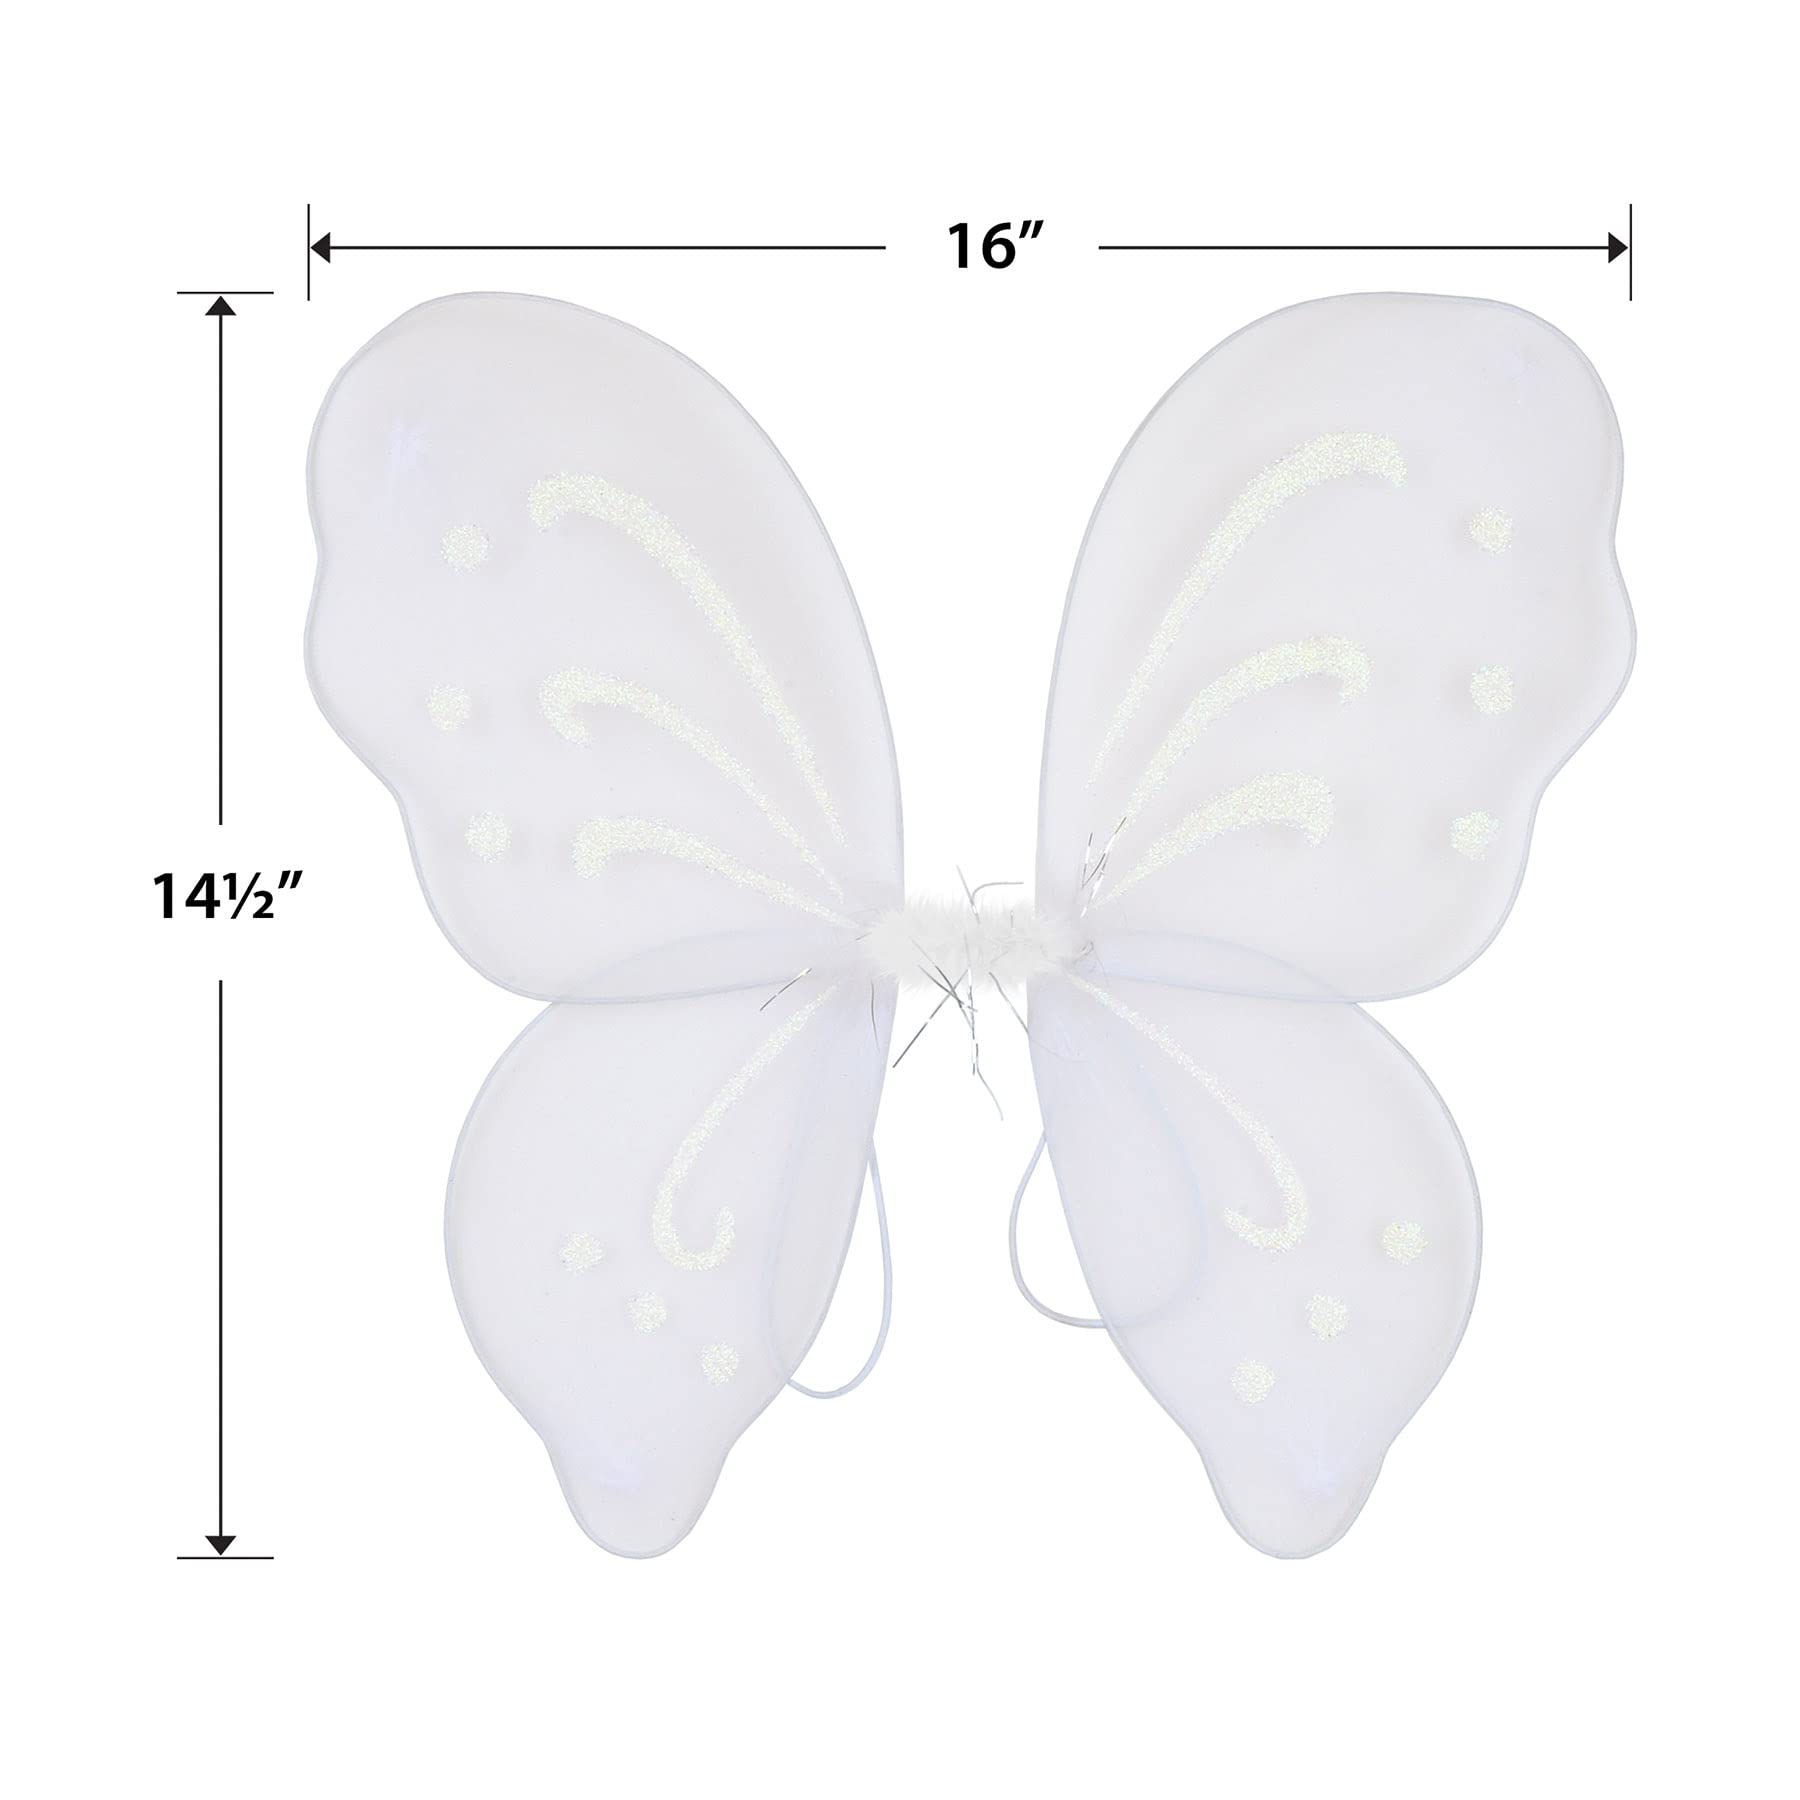 Beistle 2 Piece White Nylon Fabric Fairy Wings With Elastic Armbands – Halloween Costume Dress Up Accessories, One Size